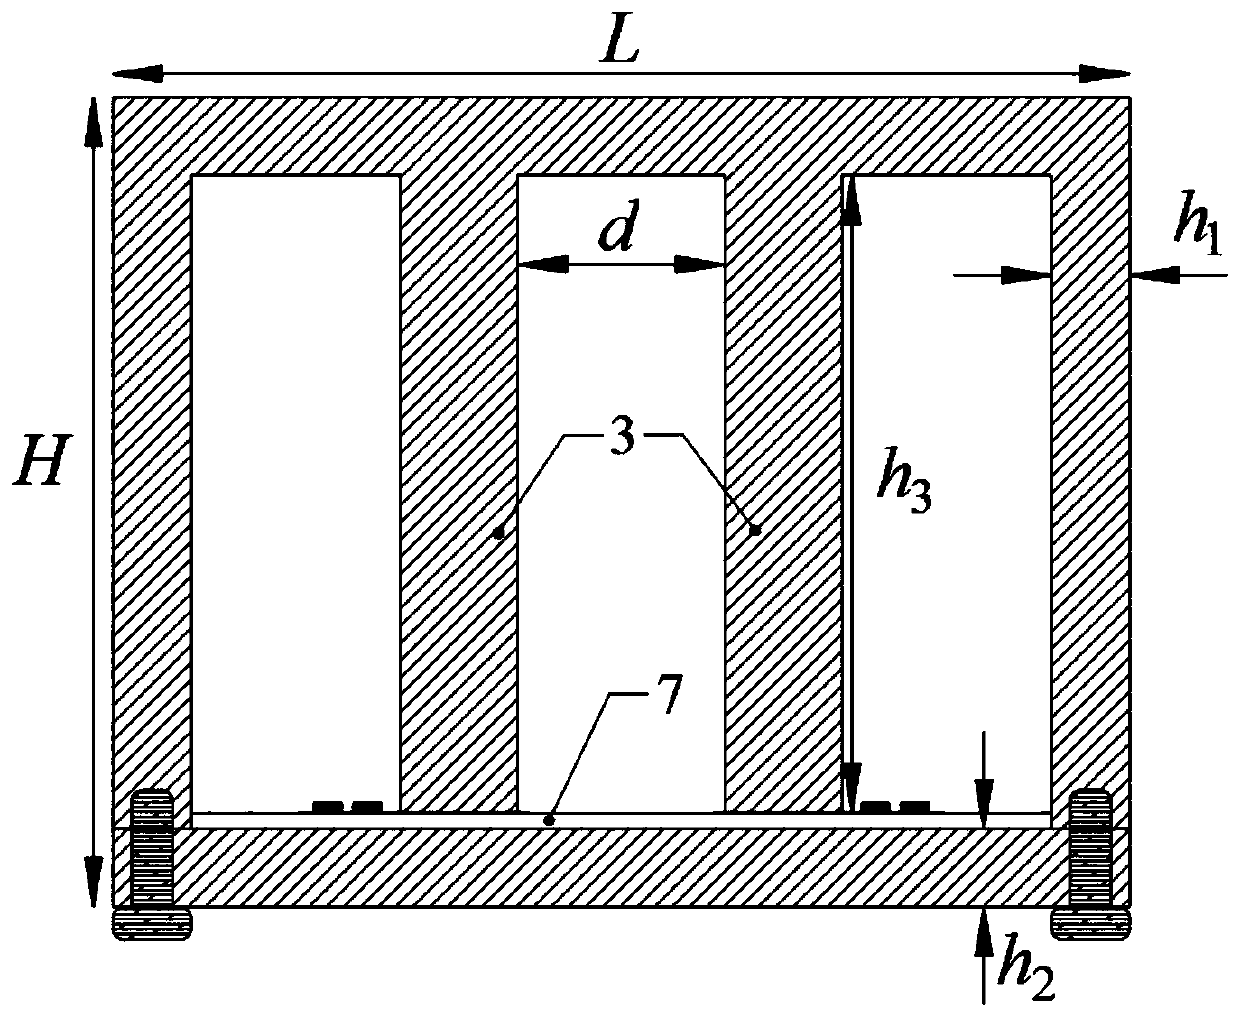 High selectivity electrically tunable coaxial filter with constant absolute bandwidth